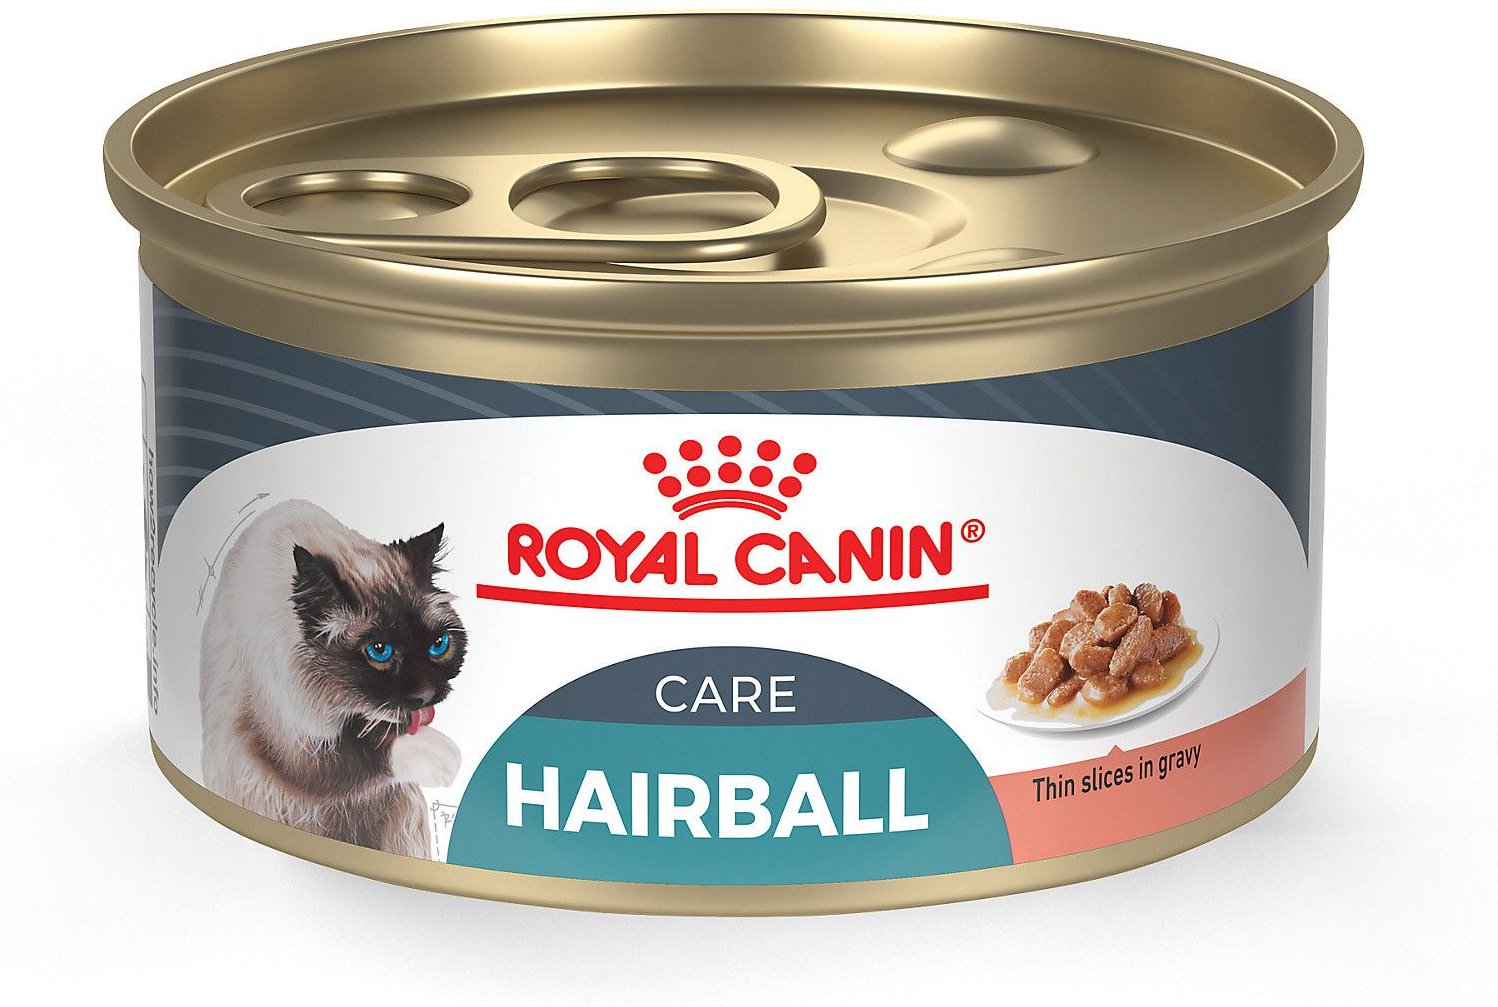 Royal Canin Hairball Care Thin Slices in Gravy Canned Cat Food, 3oz